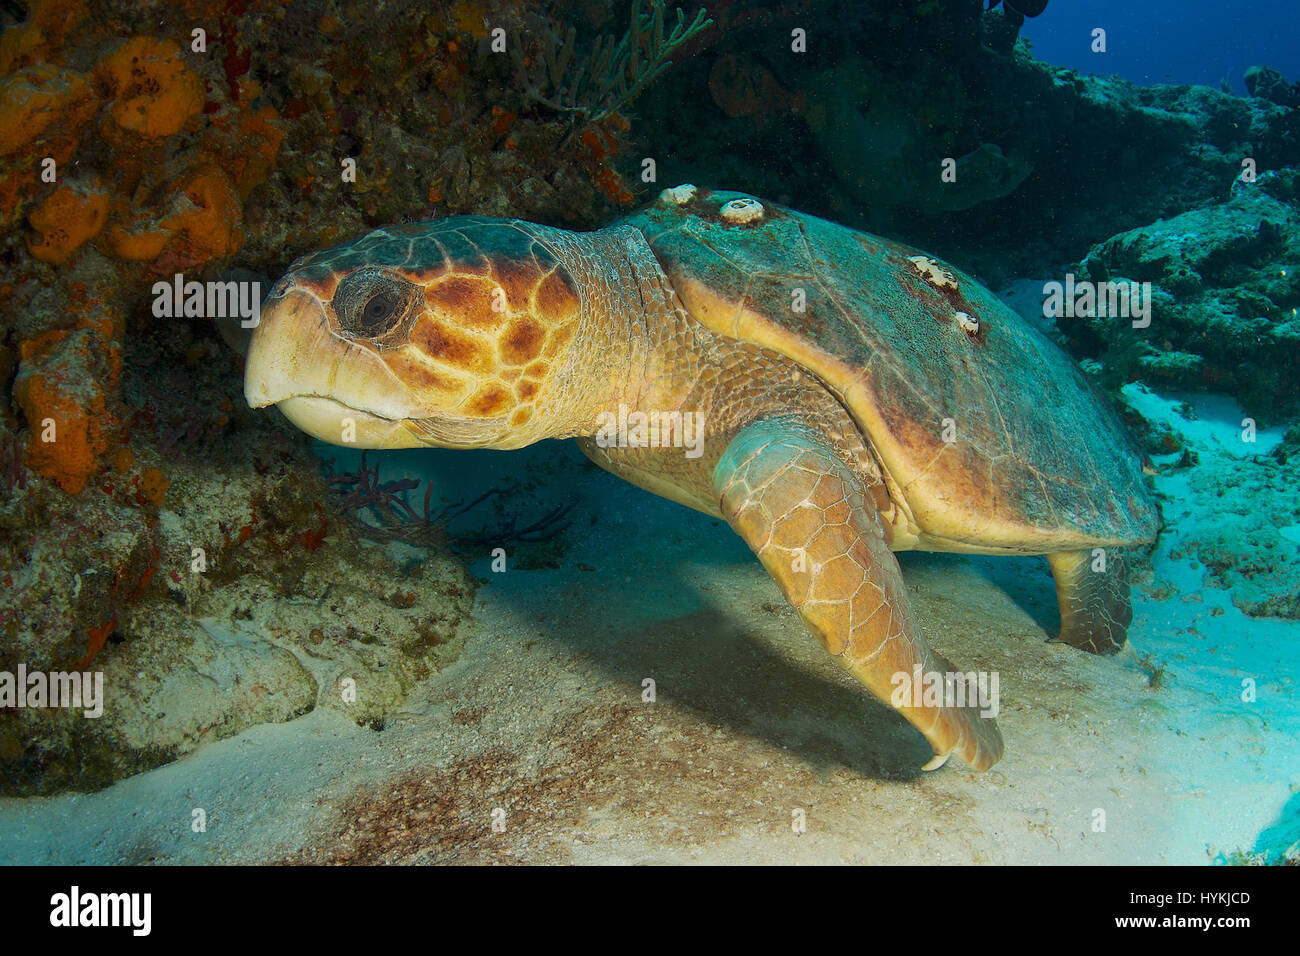 BAHAMAS: COMICAL underwater images show a happy pair of inquisitive turtles checking out their reflections in the camera lens for the last time as they were being released into the wild. The amusing pictures show the curious baby Loggerhead turtles swimming towards the camera lens after catching a glimpse of themselves as if to make sure they looked right for their swim into the unknown. Other shots show a fully grown Loggerhead turtle ignore the photographer completely as he searches the seabed for his next meal. The spectacular snaps of the juvenile turtles were taken in the Bahamas near Gra Stock Photo